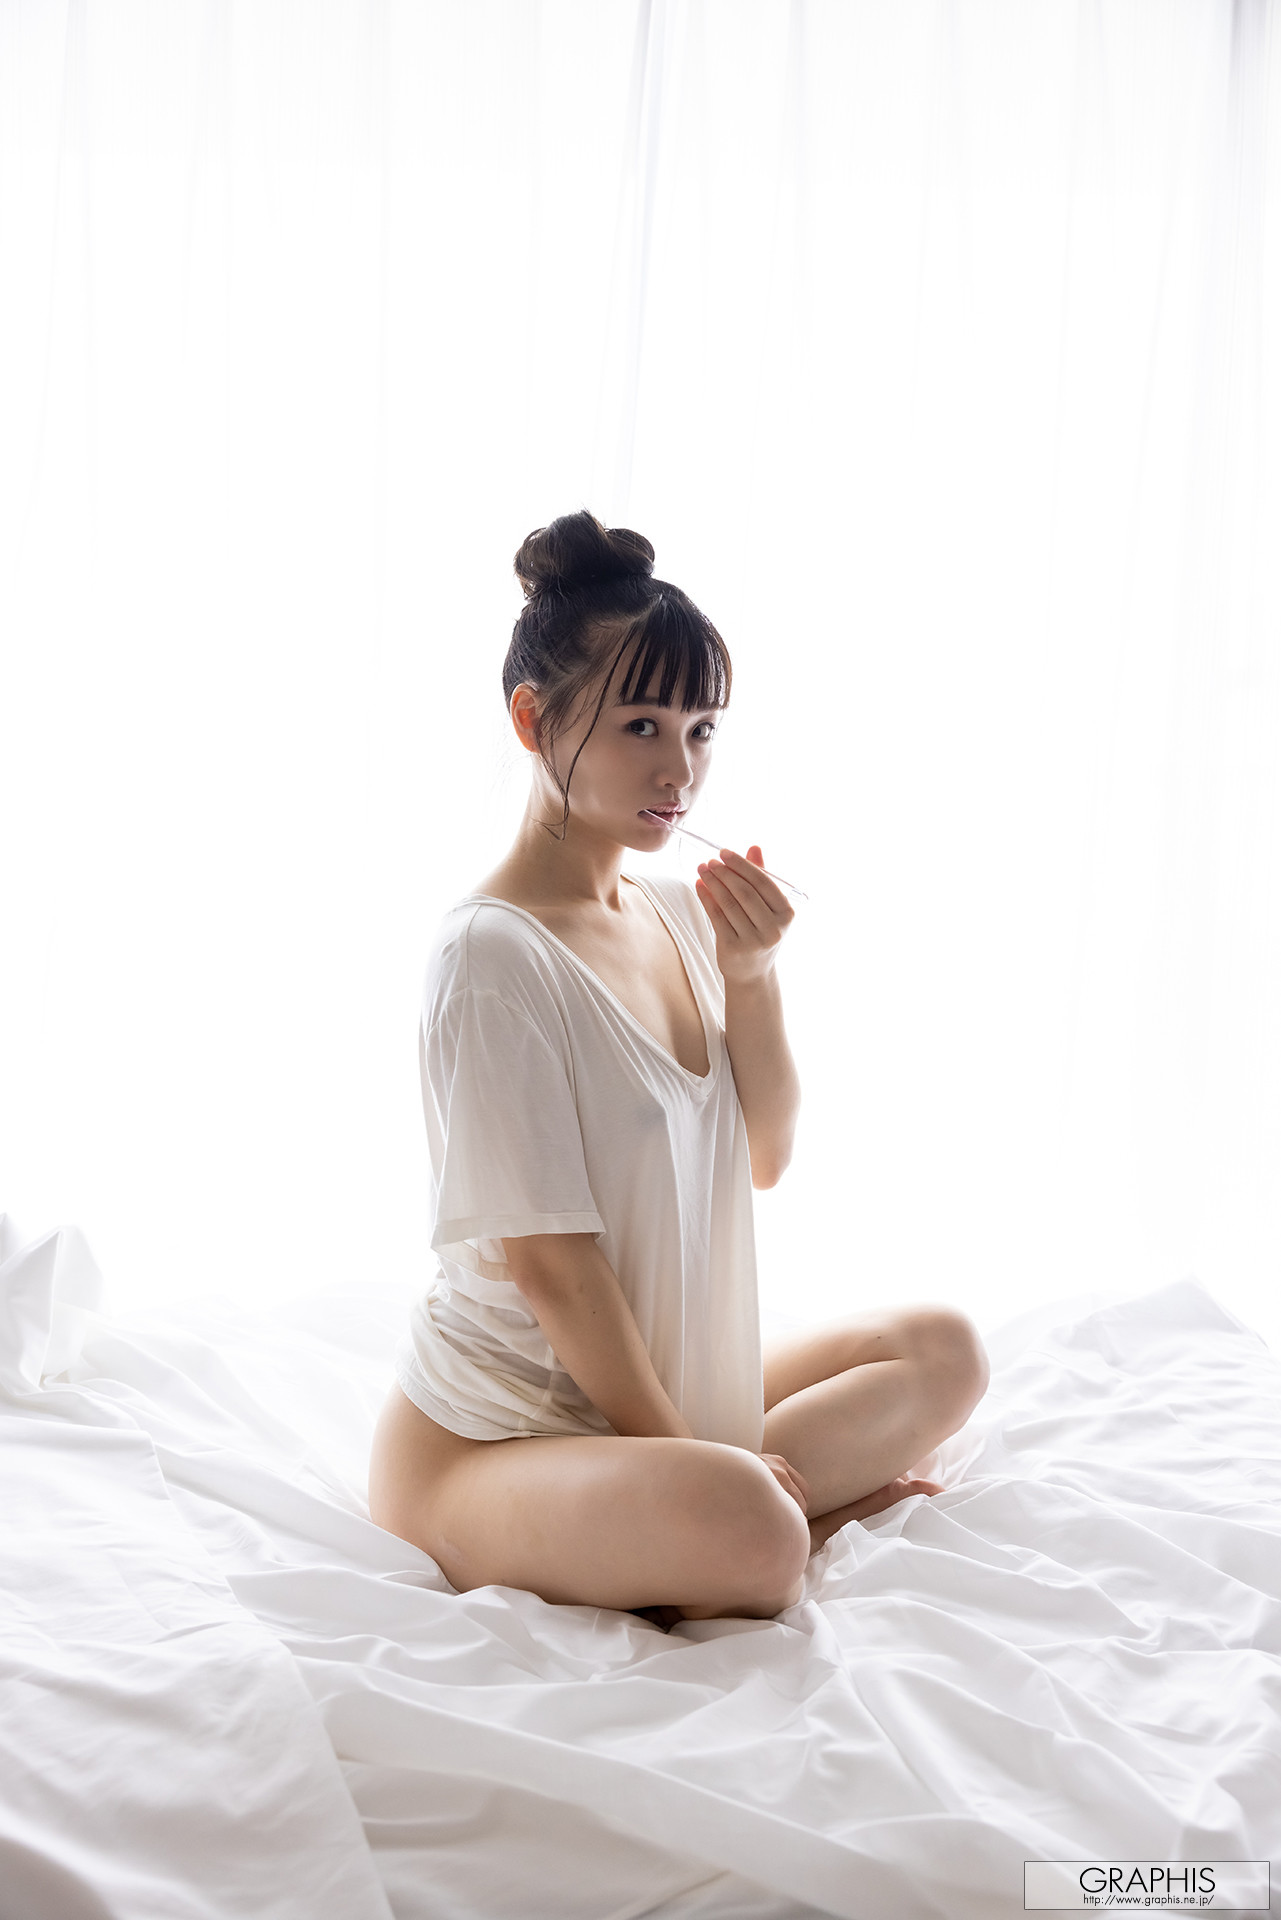 Urara Kanon 花音うらら, [Graphis] Gals 「To Be Loved」 Vol.03